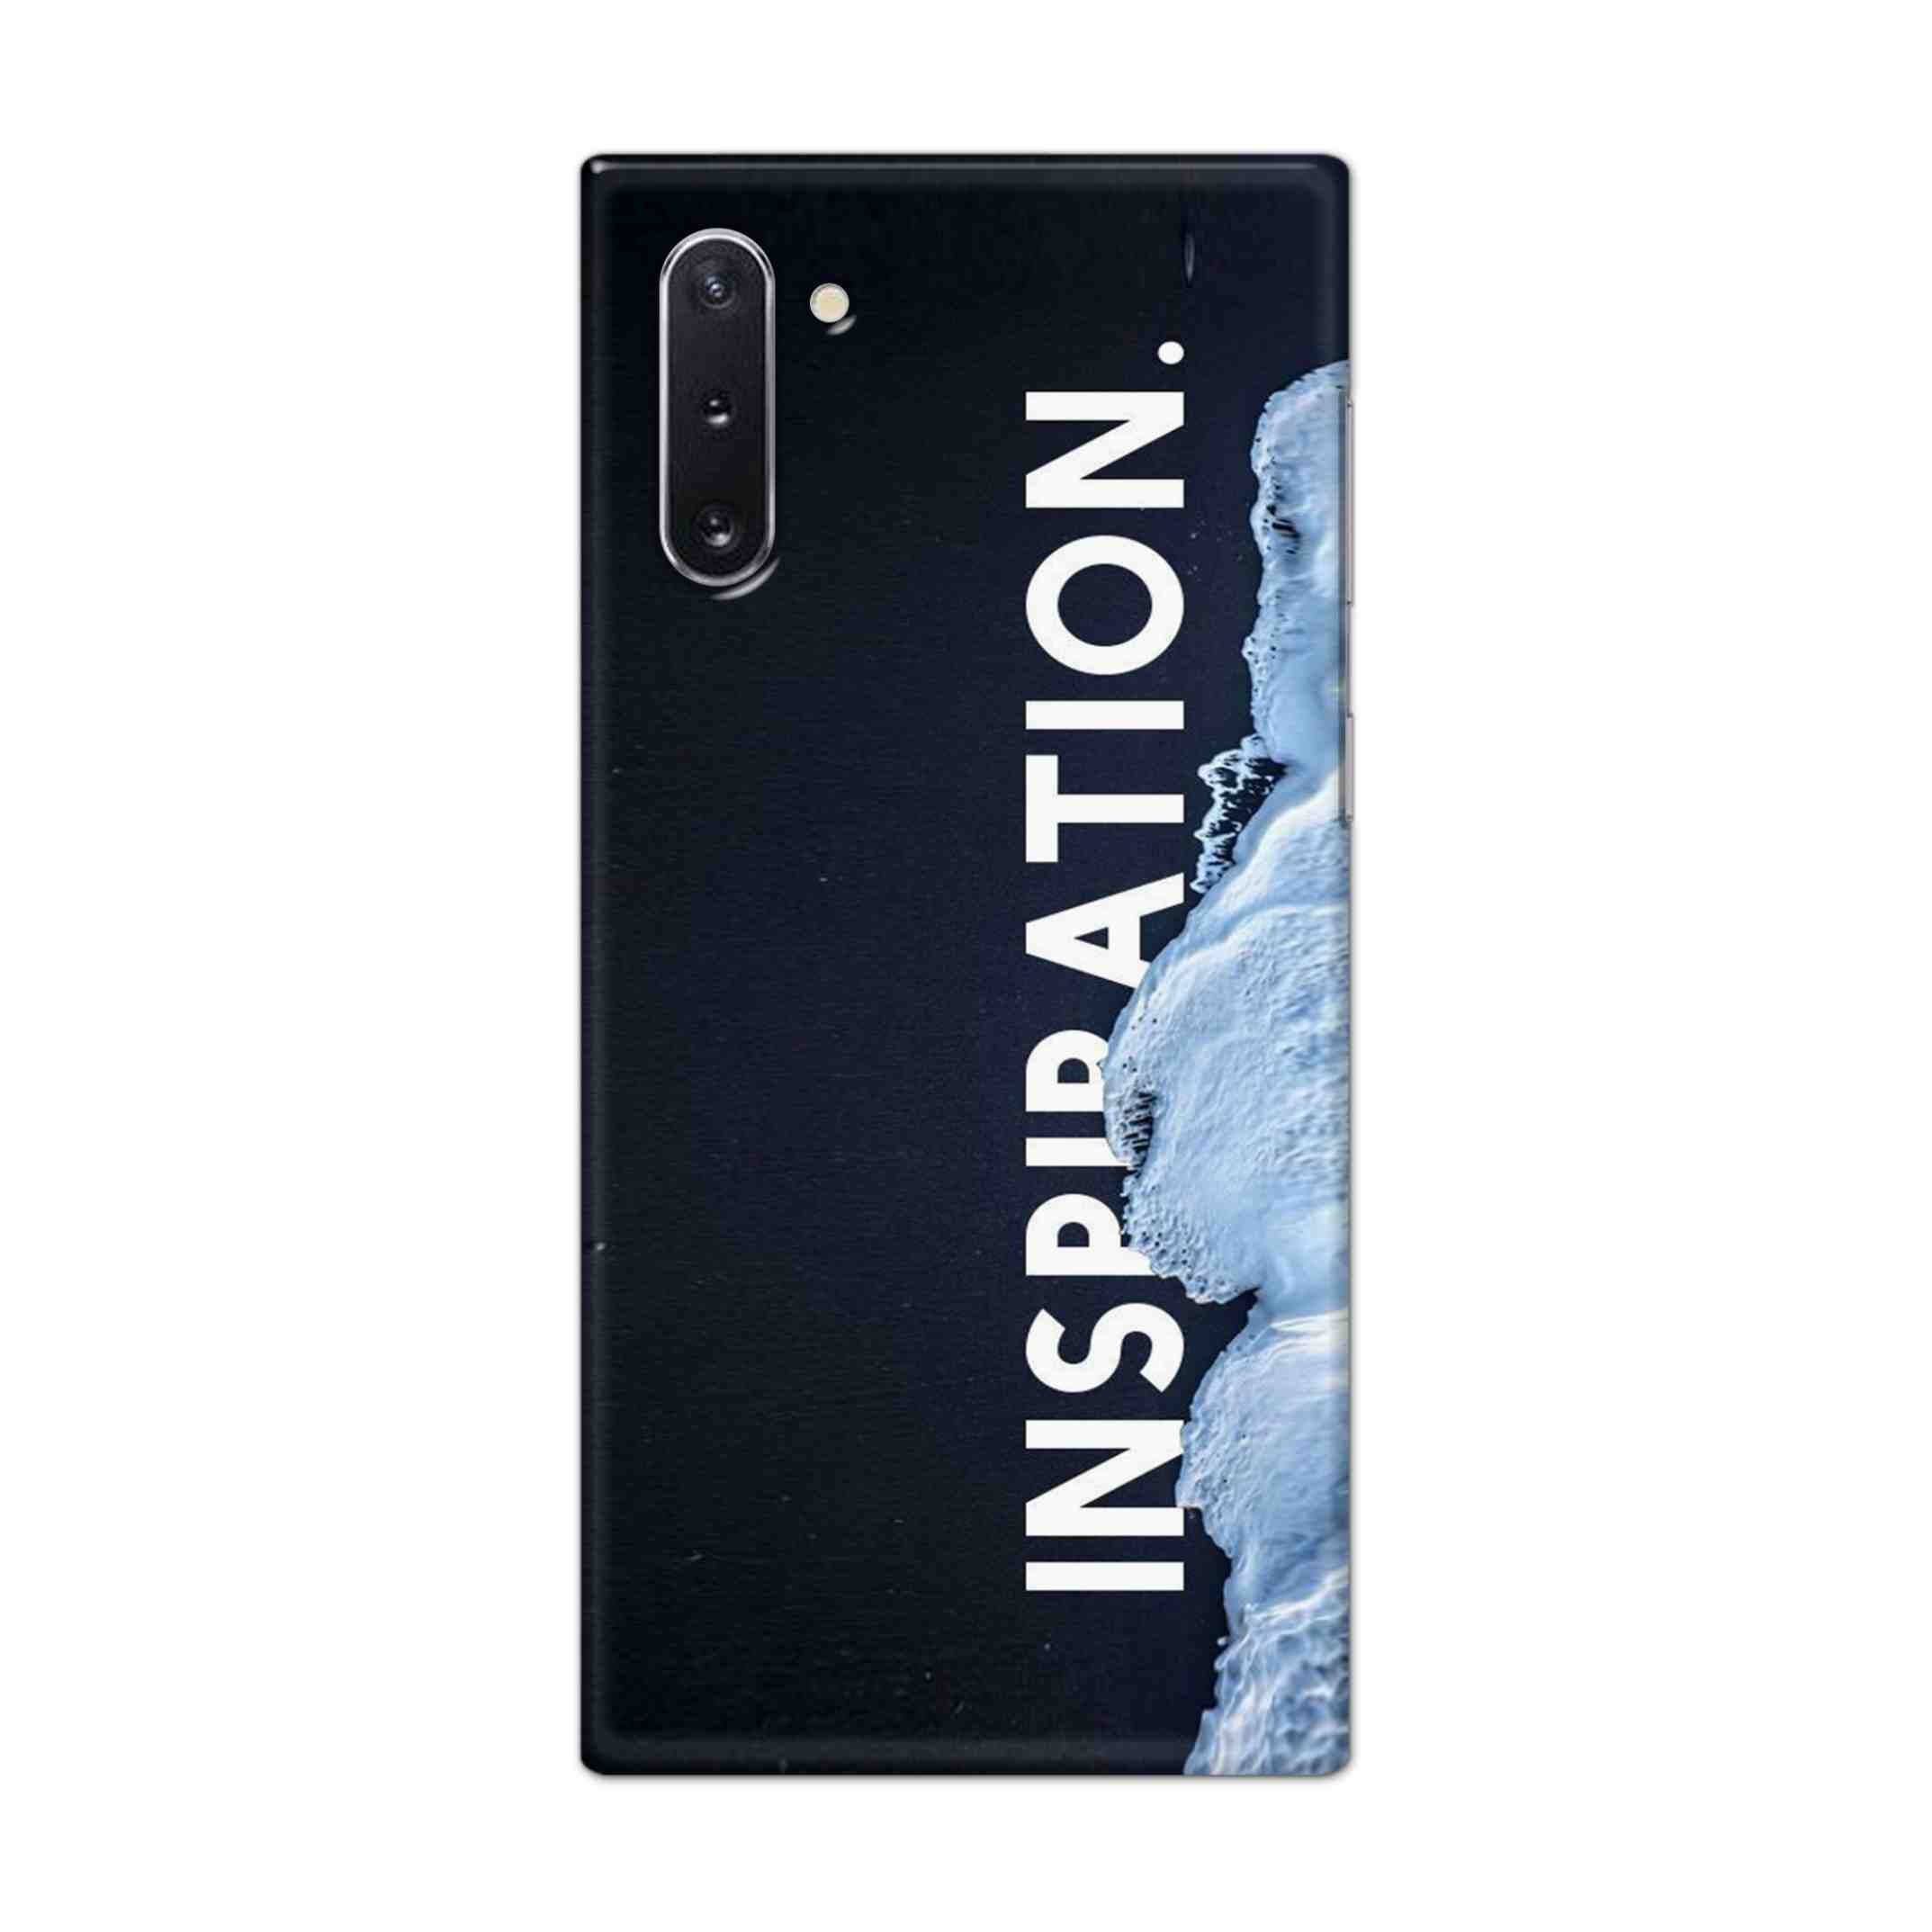 Buy Inspiration Hard Back Mobile Phone Case Cover For Samsung Galaxy Note 10 Online